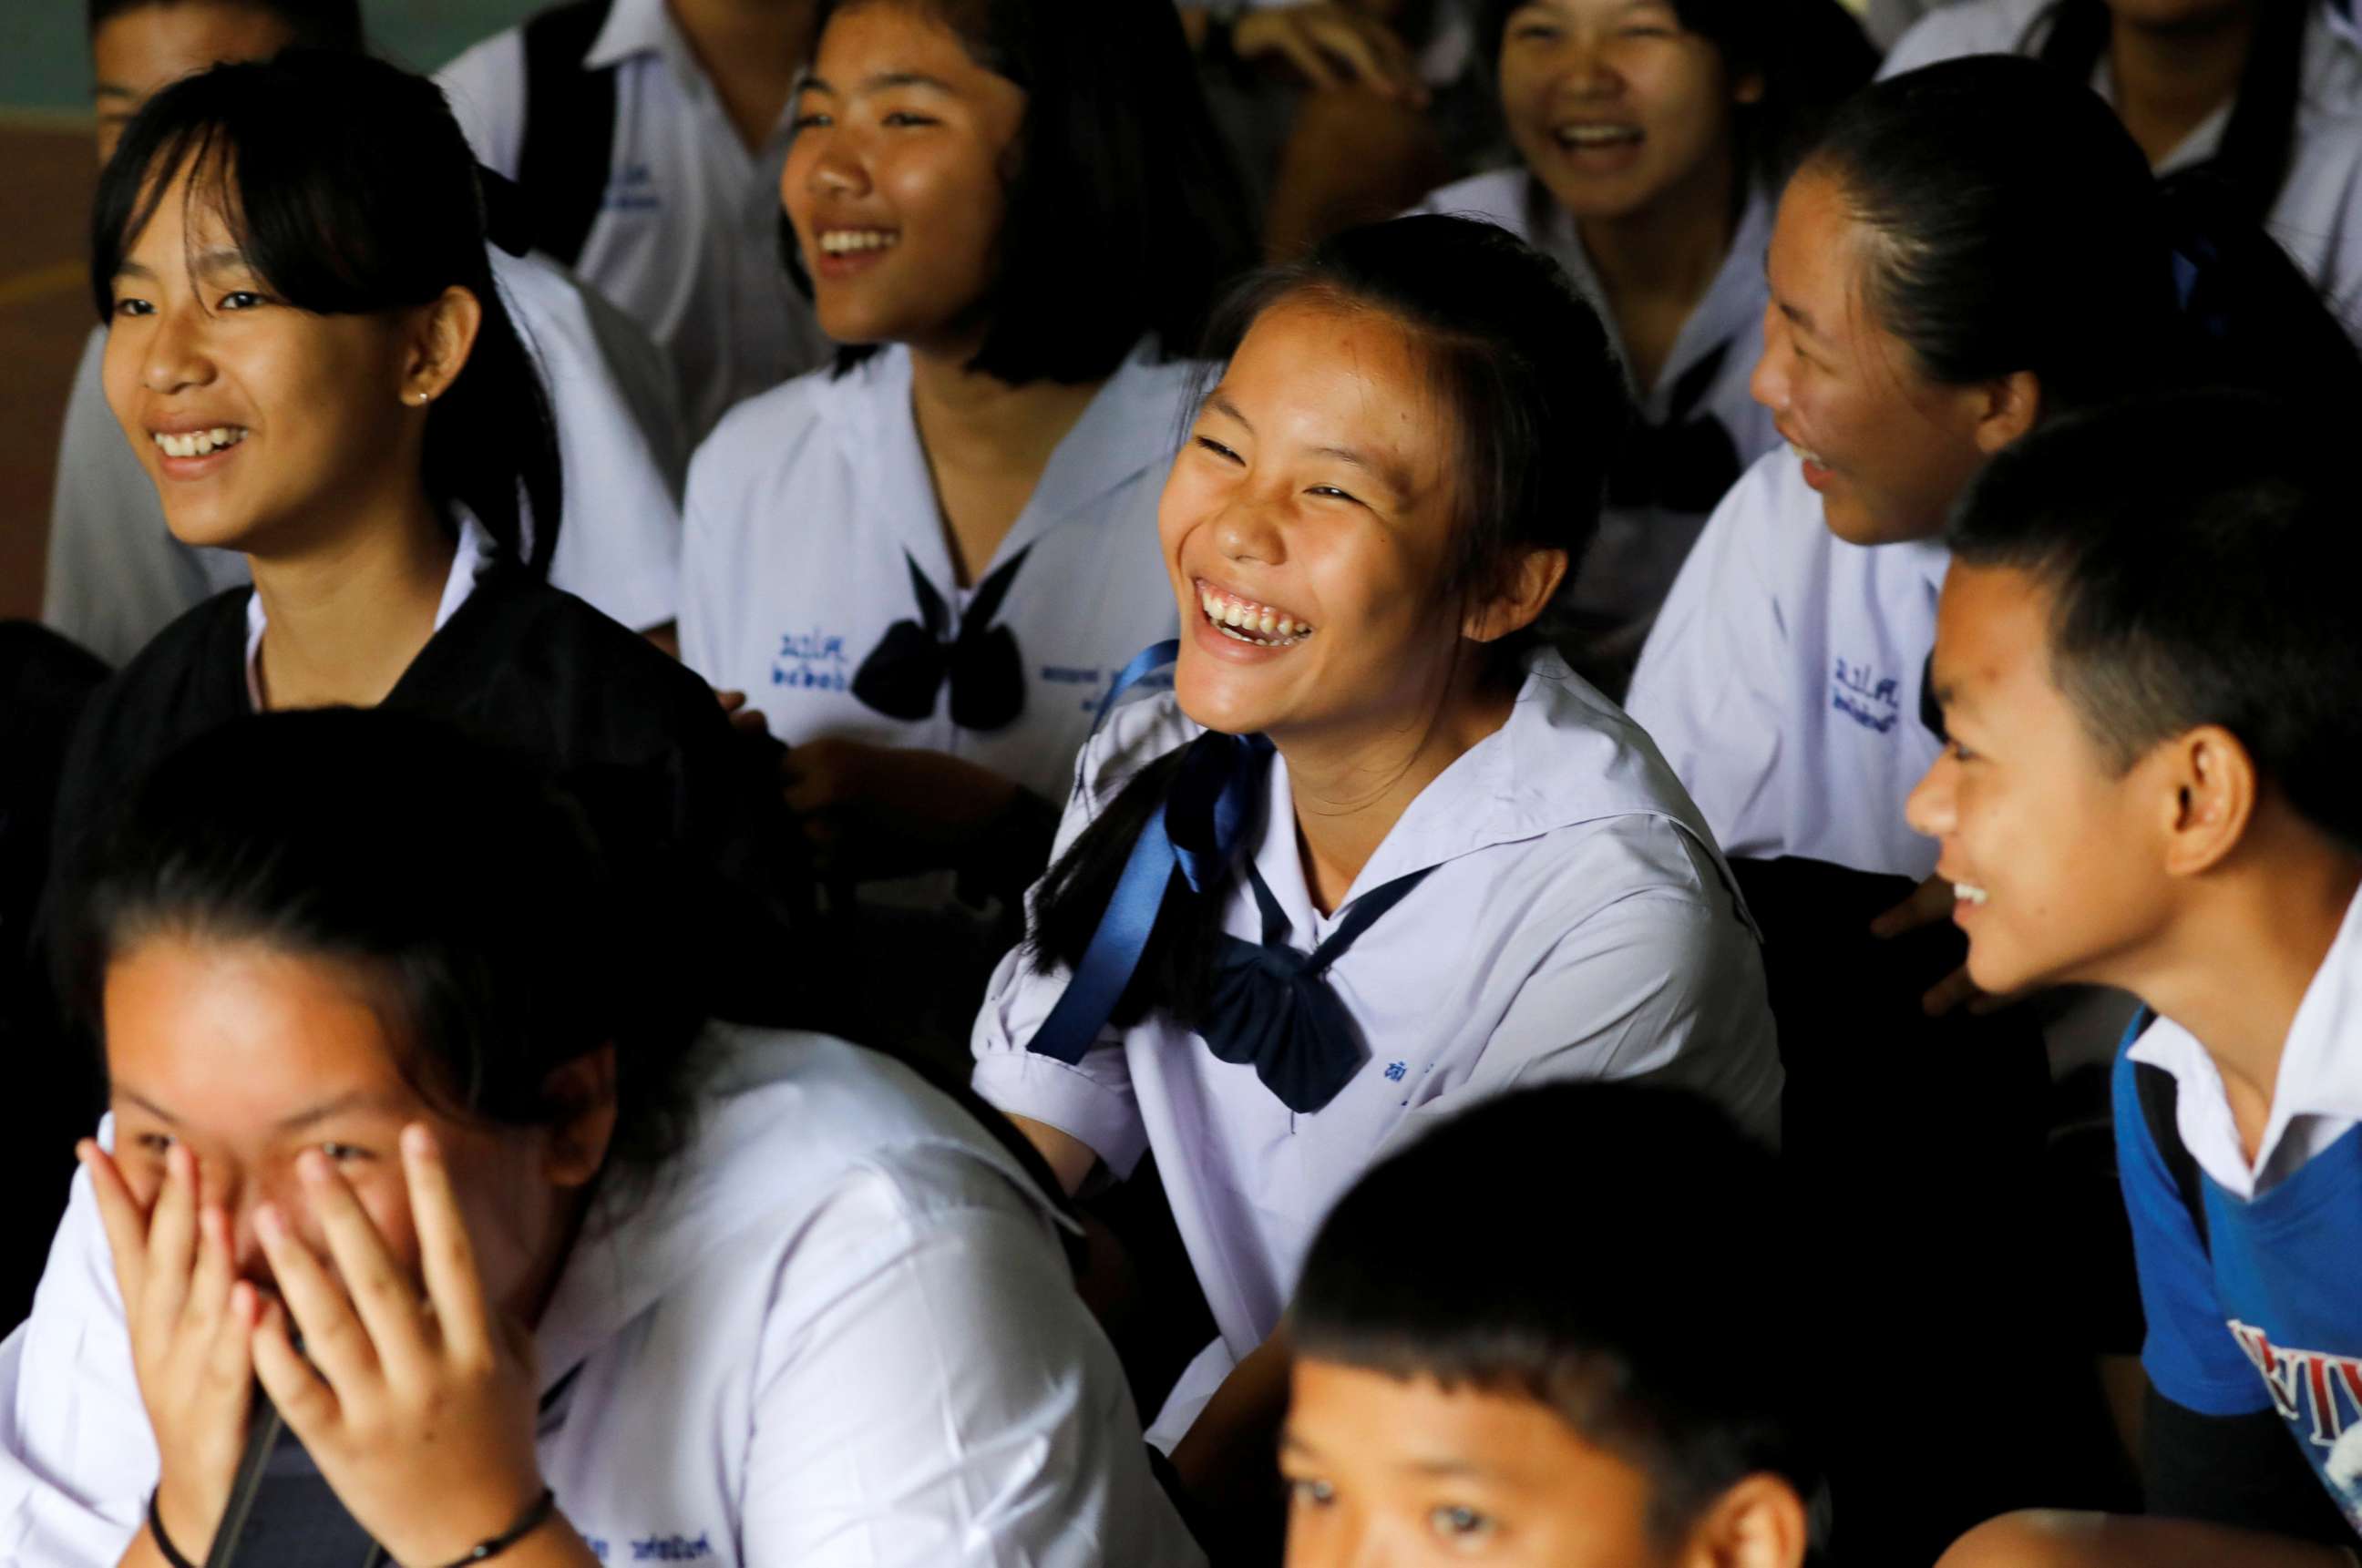 PHOTO: Classmates react after a teacher announces that some of the 12 schoolboys who were trapped inside a flooded cave, have been rescued, at Mae Sai Prasitsart school,  in the northern province of Chiang Rai, Thailand, July 9, 2018.